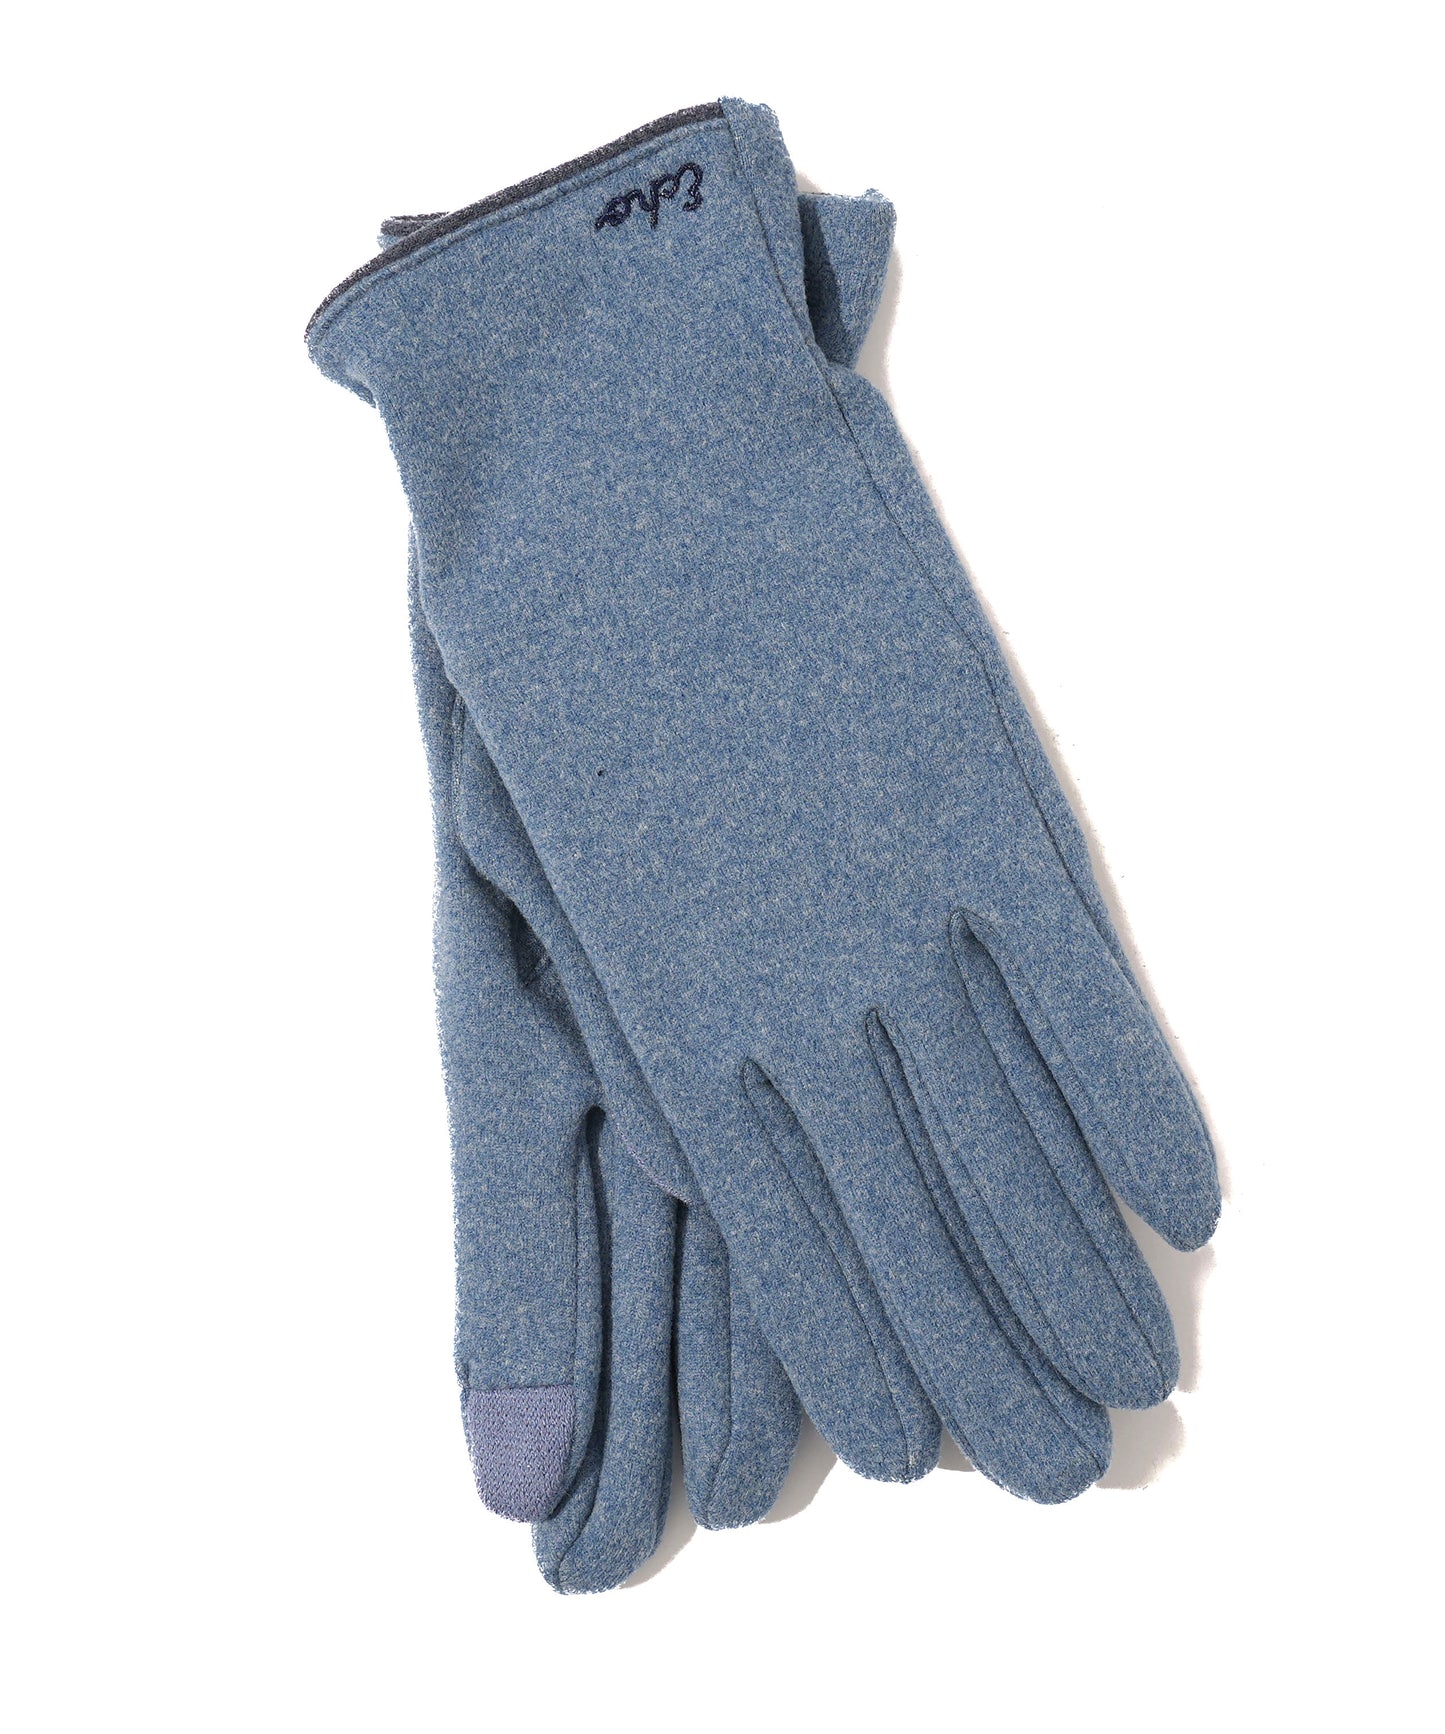 Cozy Stretch Touch Glove in color Denim